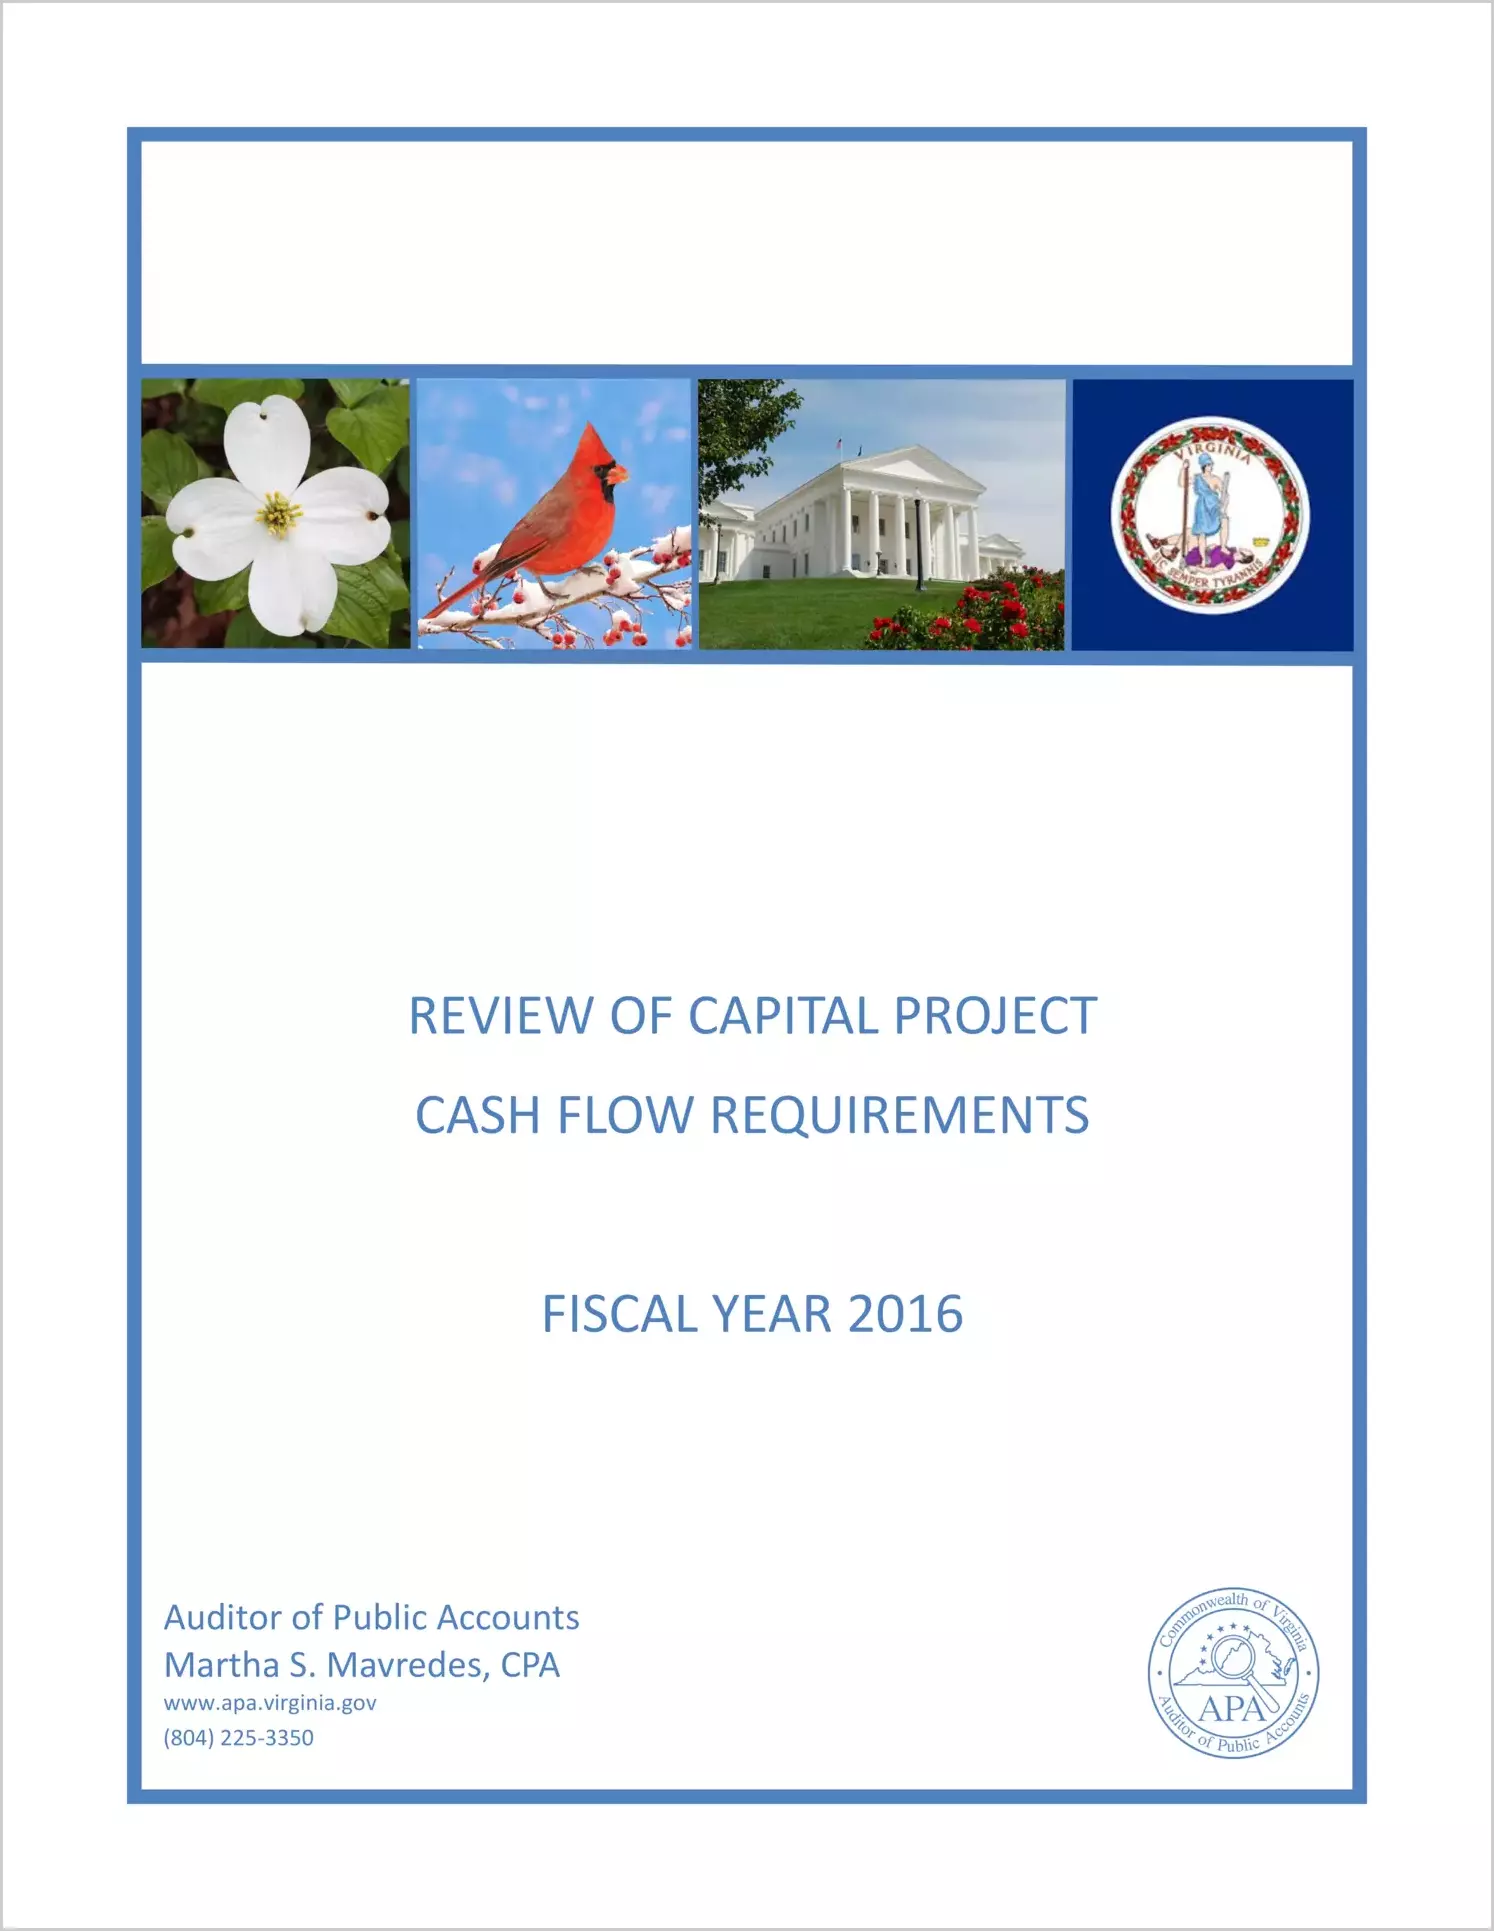 Review of Capital Project Cash Flow Requirements - Fiscal Year 2016